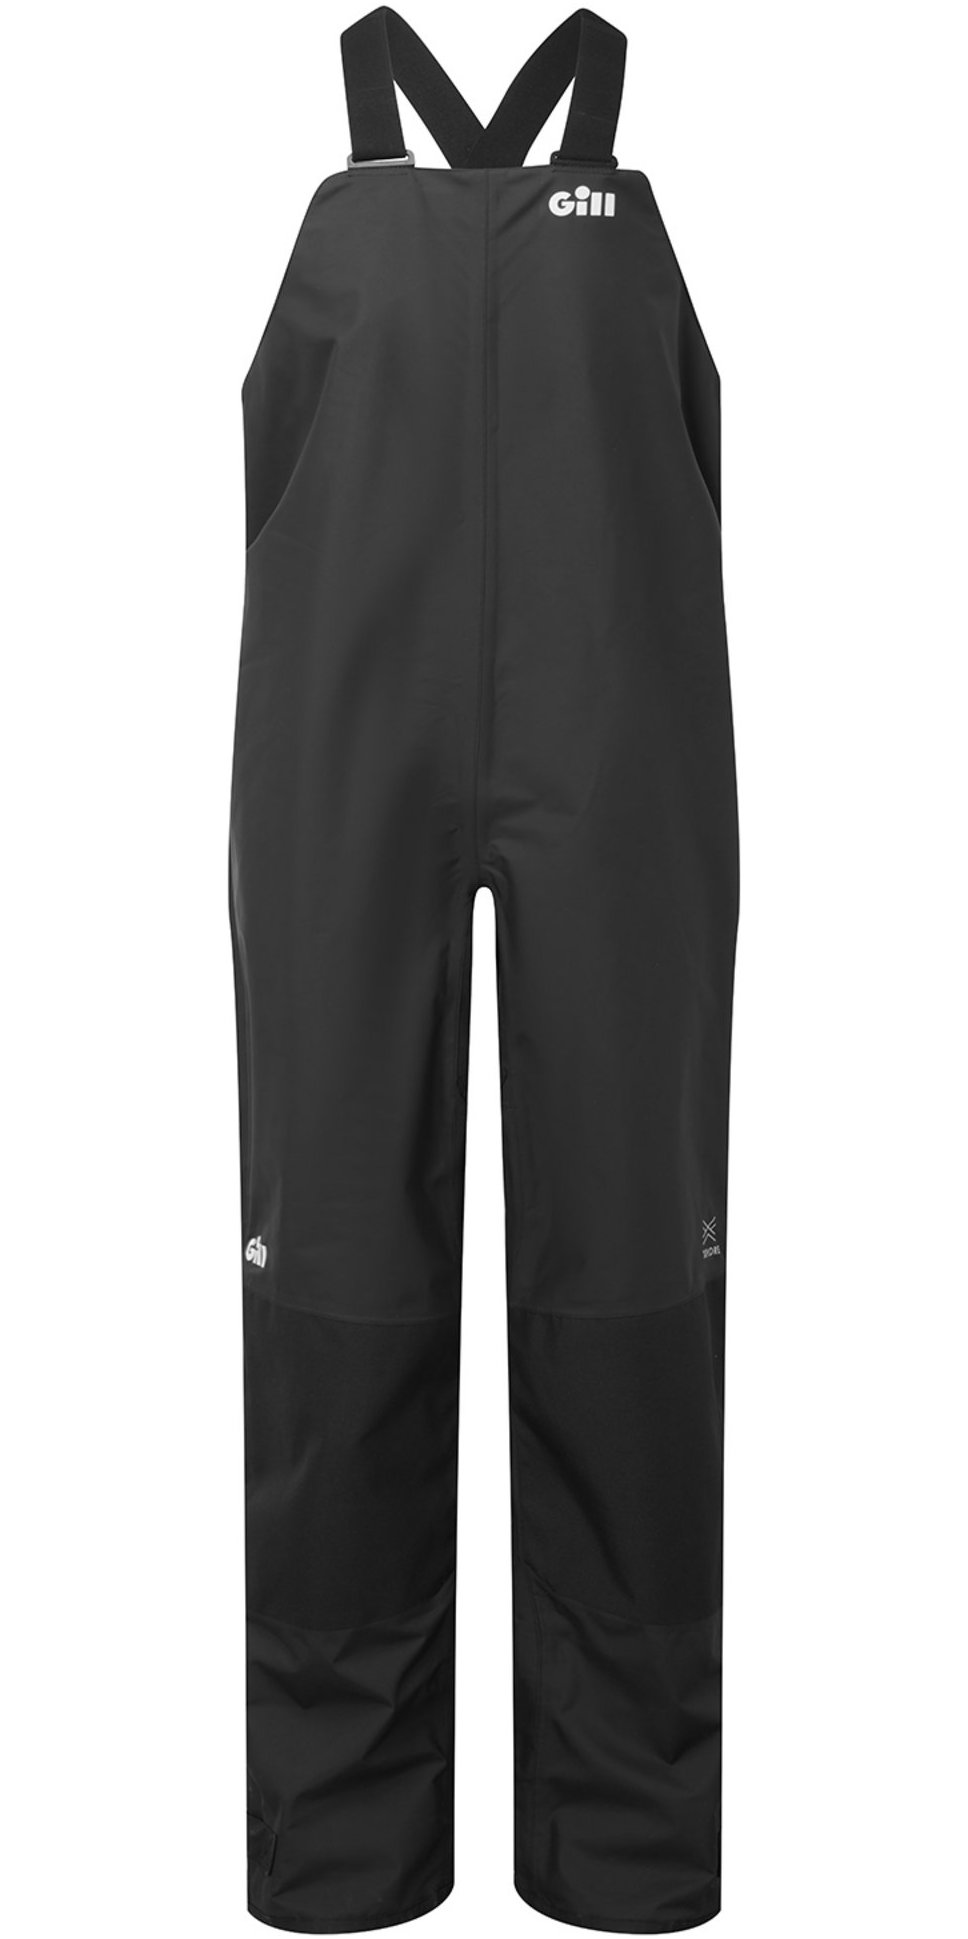 Super tough sailing trousers from Gill  boatscom